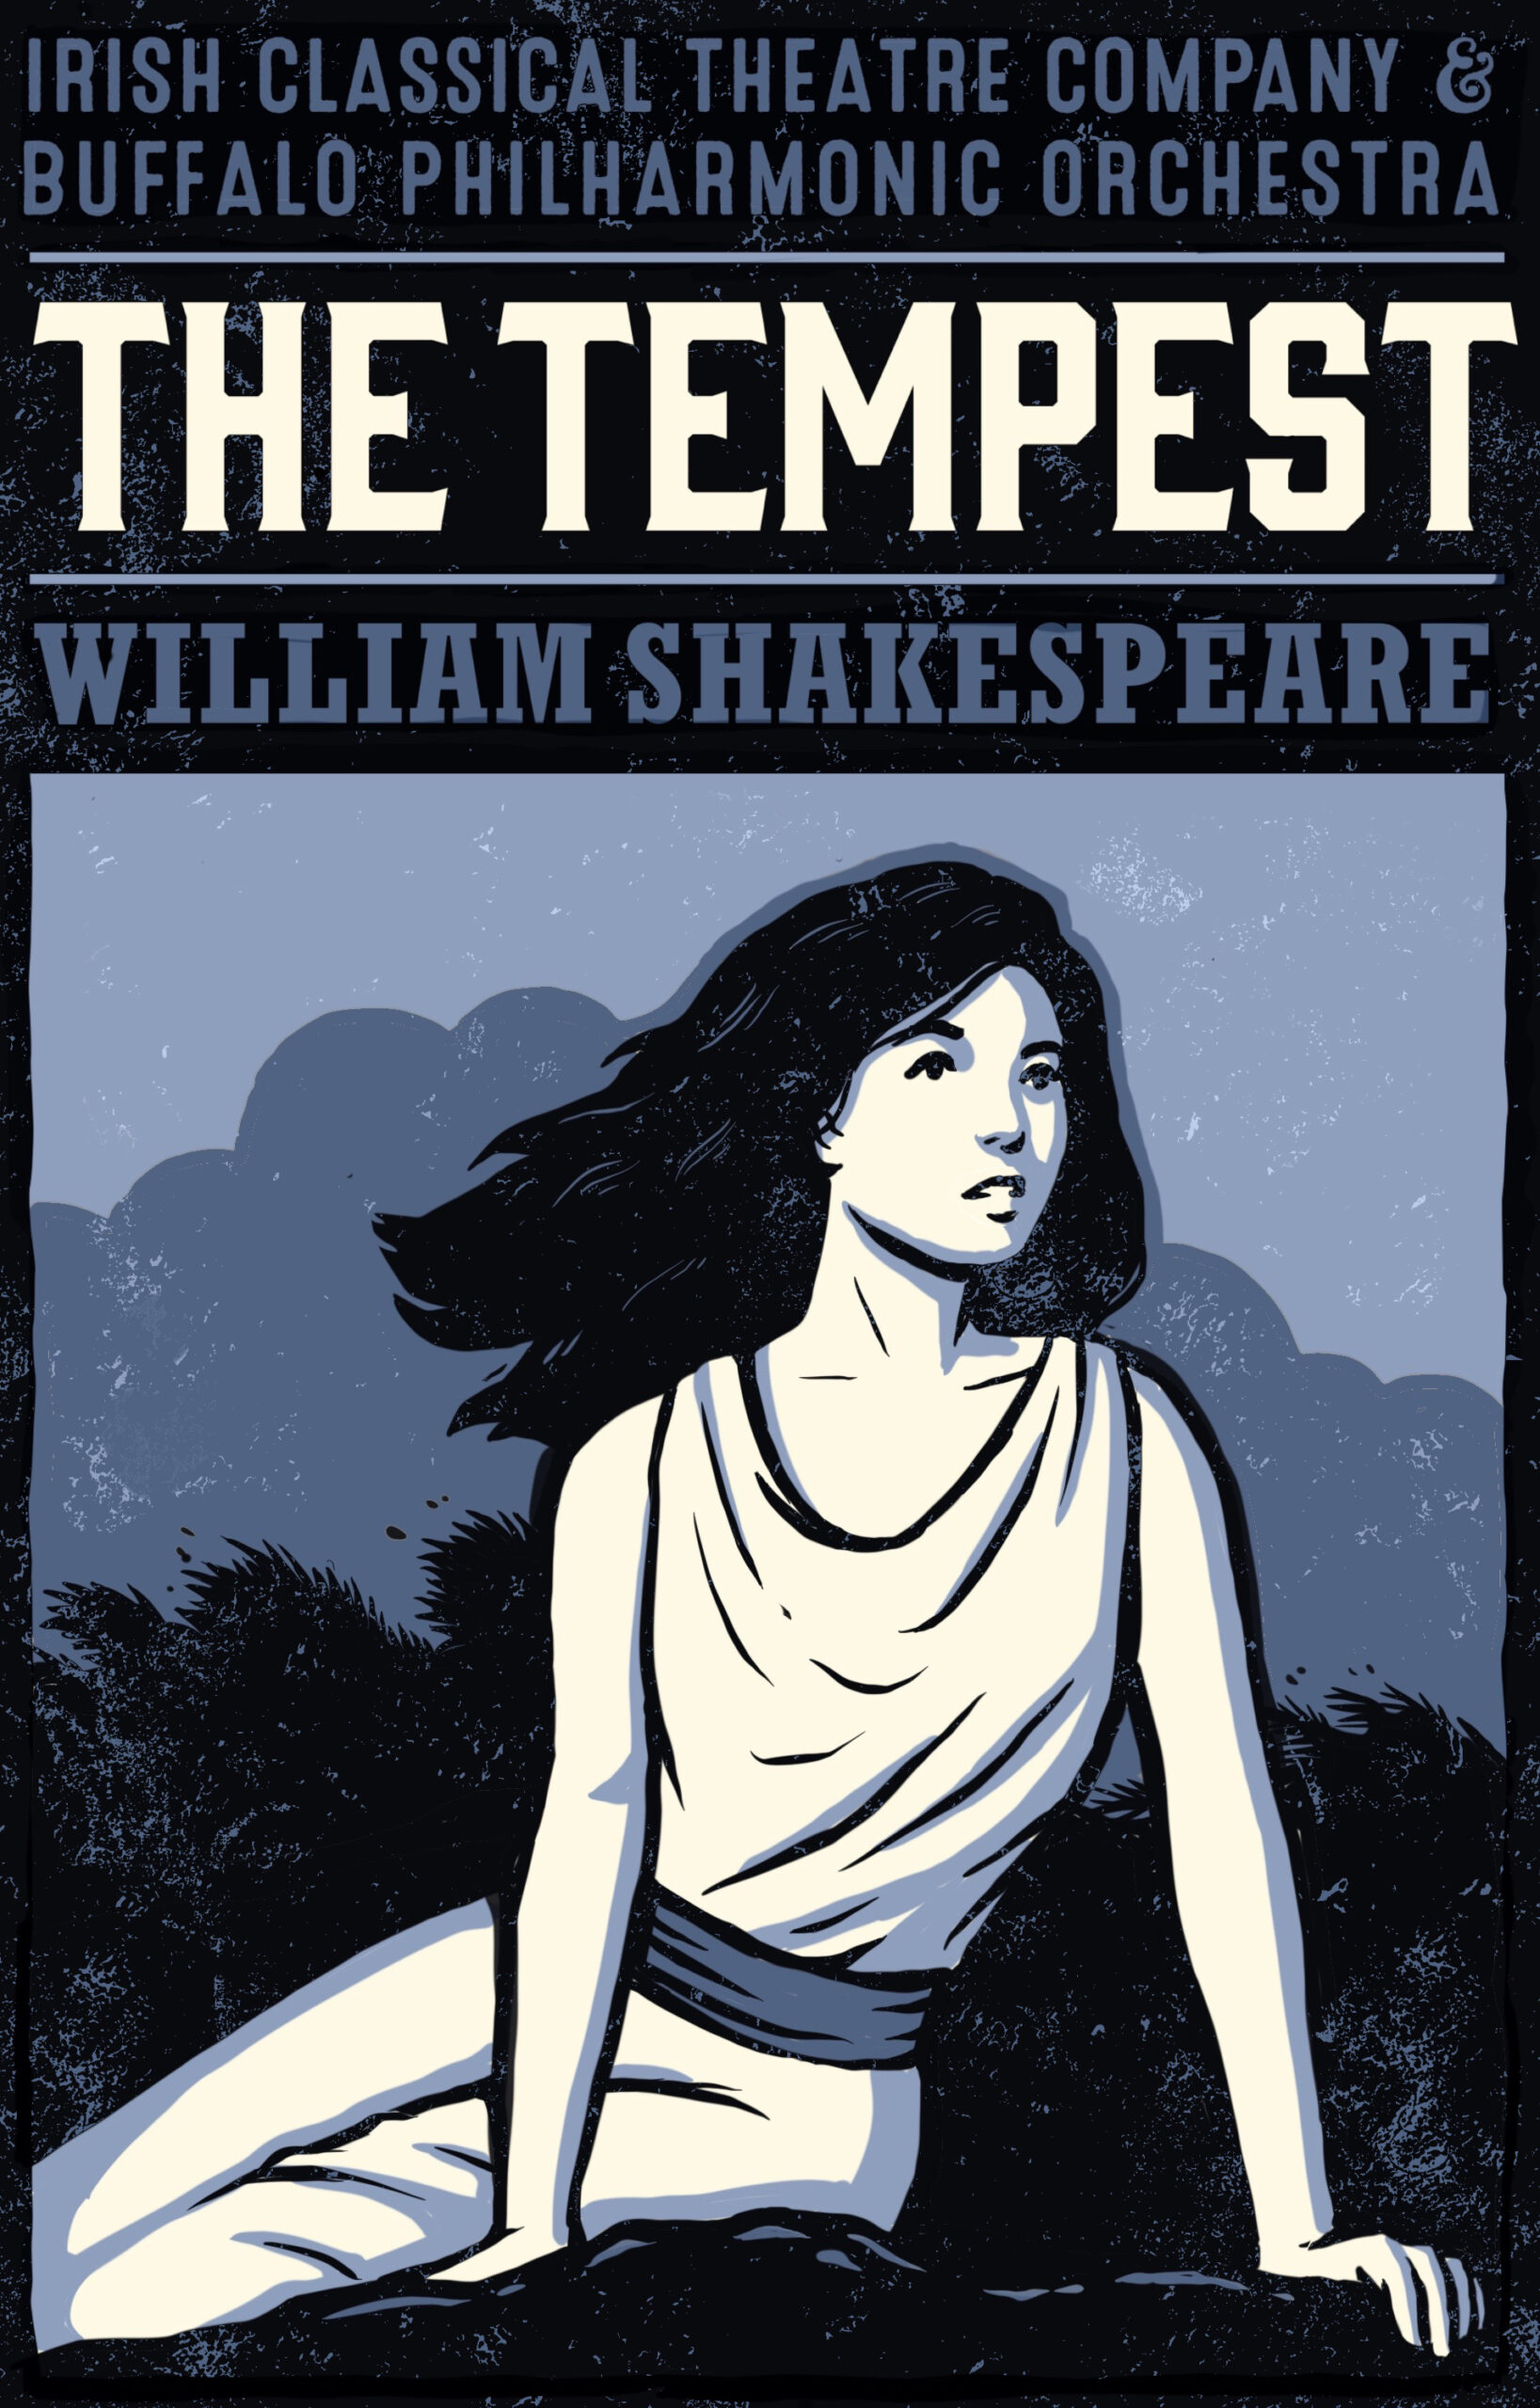 Theater Review: The Tempest